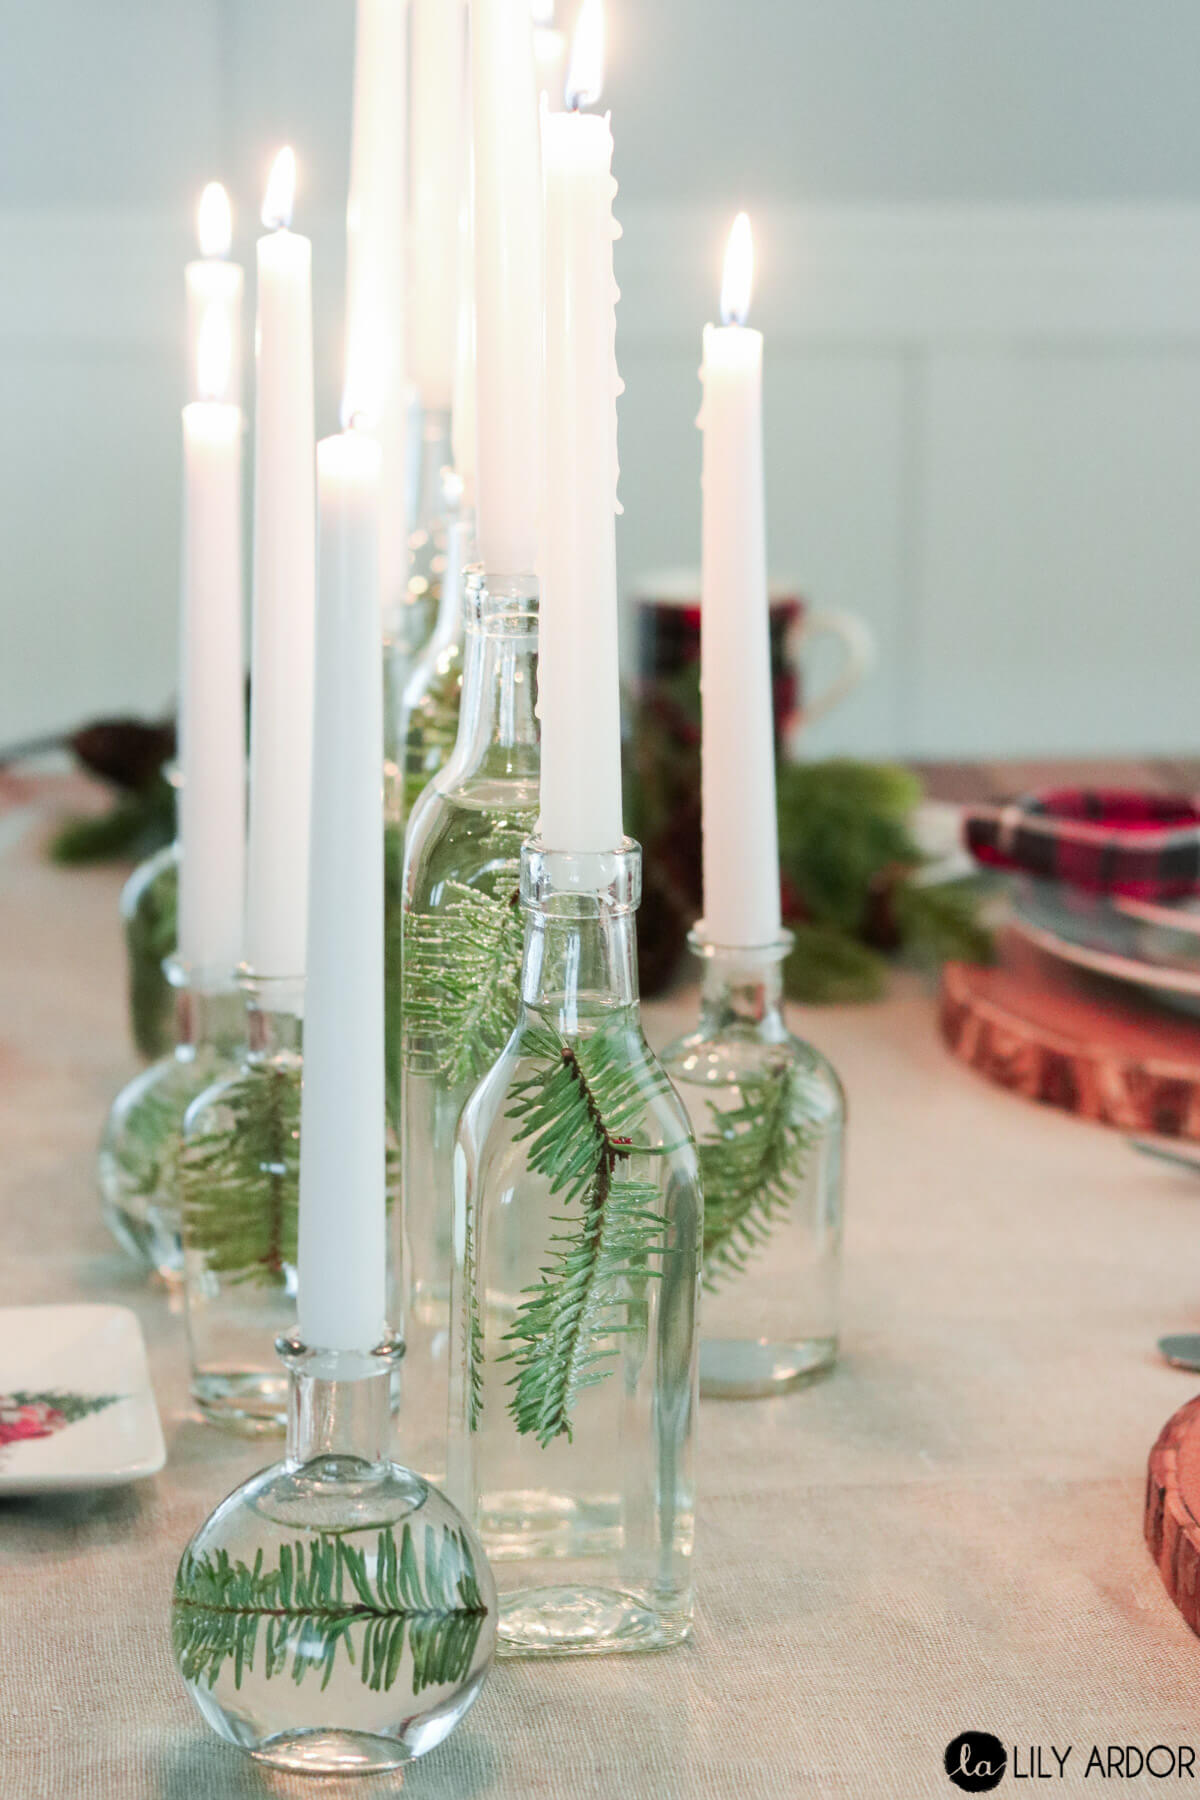 Elegant Clean and Simple Winter White Candles